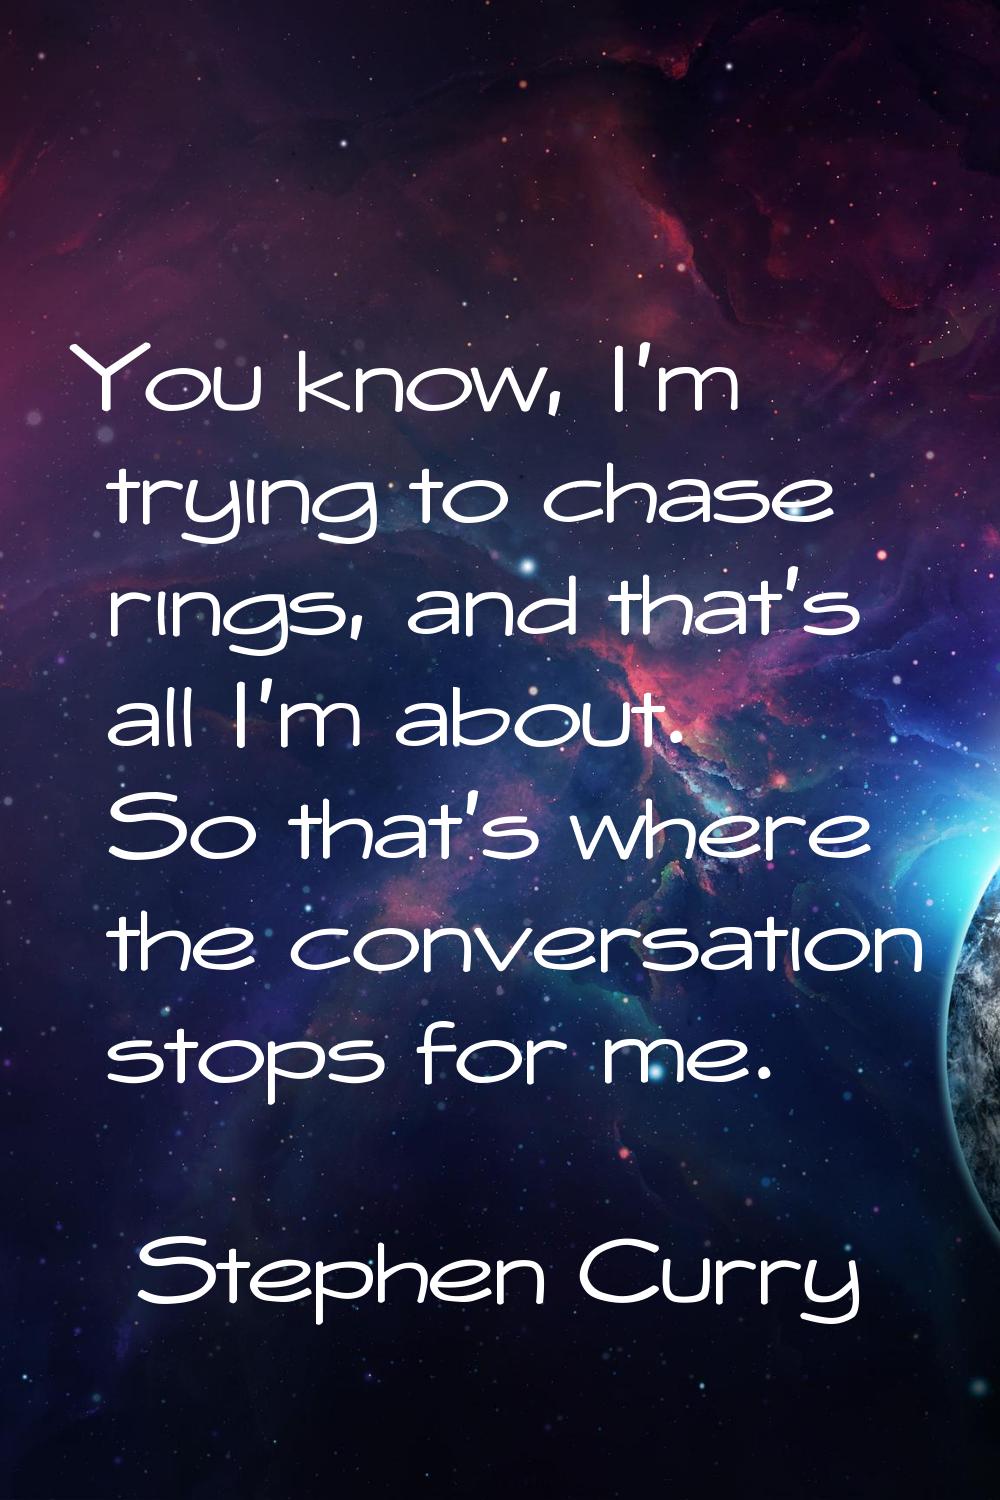 You know, I'm trying to chase rings, and that's all I'm about. So that's where the conversation sto